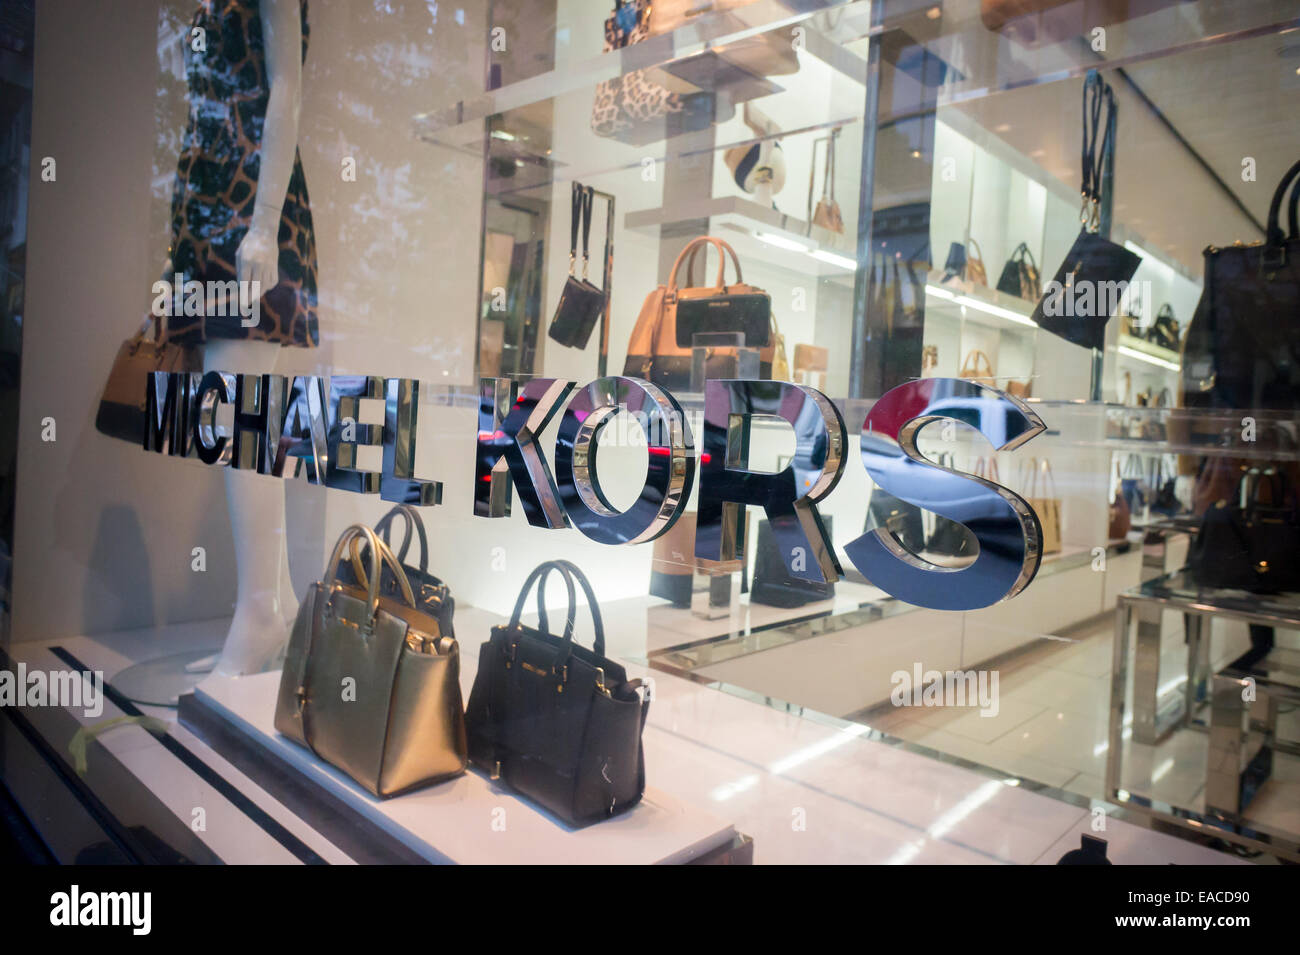 A Michael Kors store in Soho in New York Stock Photo